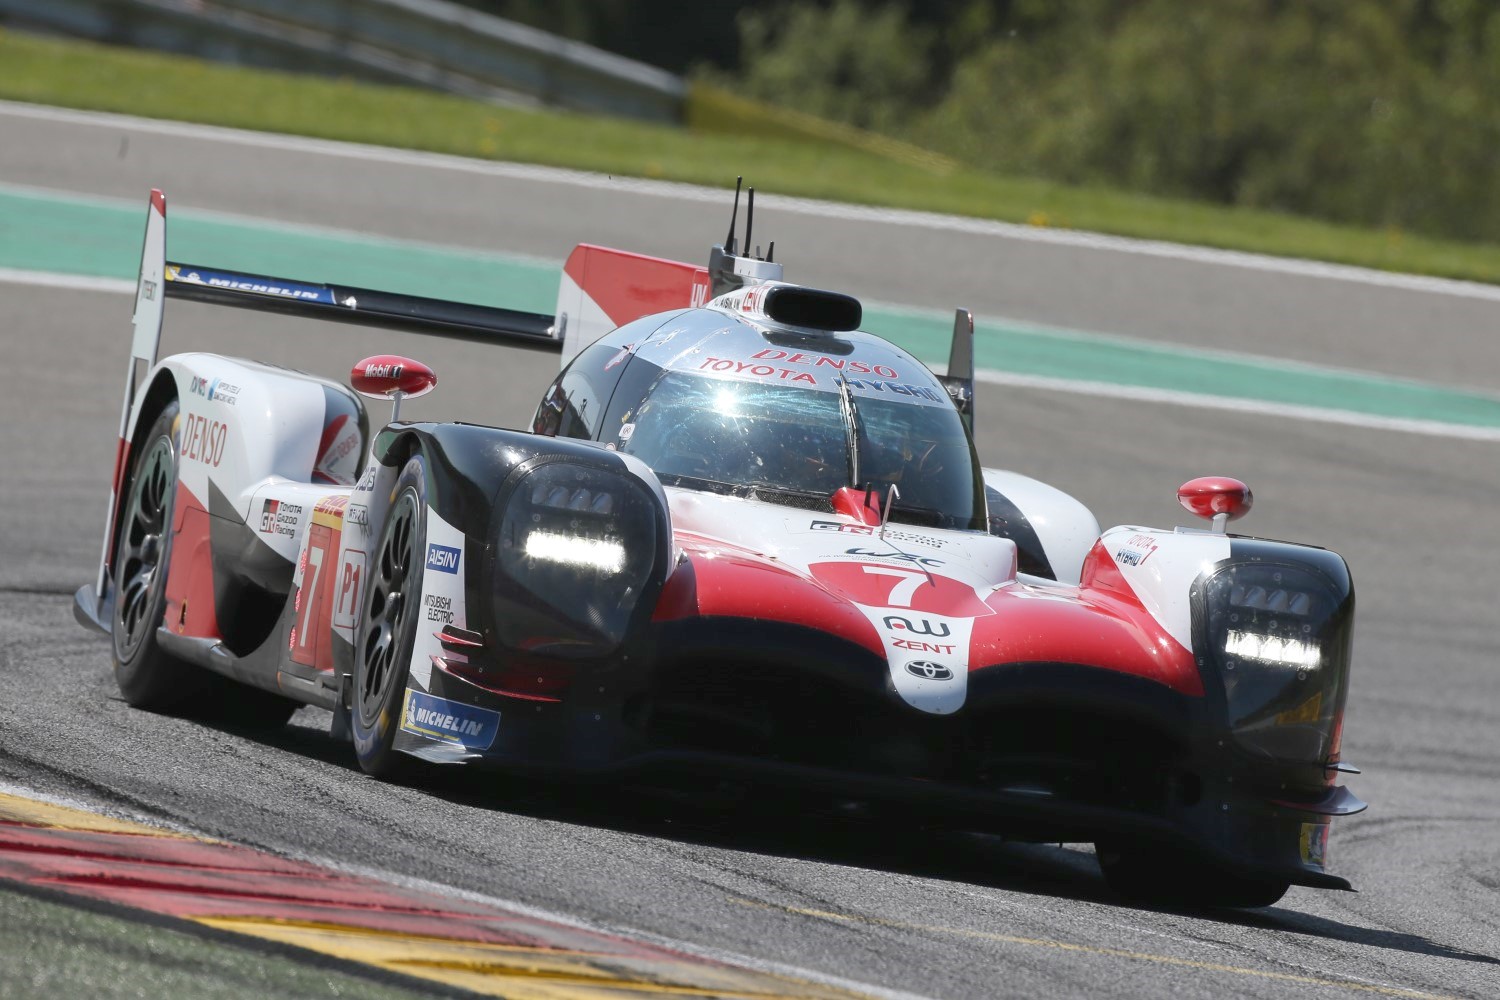 Toyota has near zero competition in WEC. A win is assured.